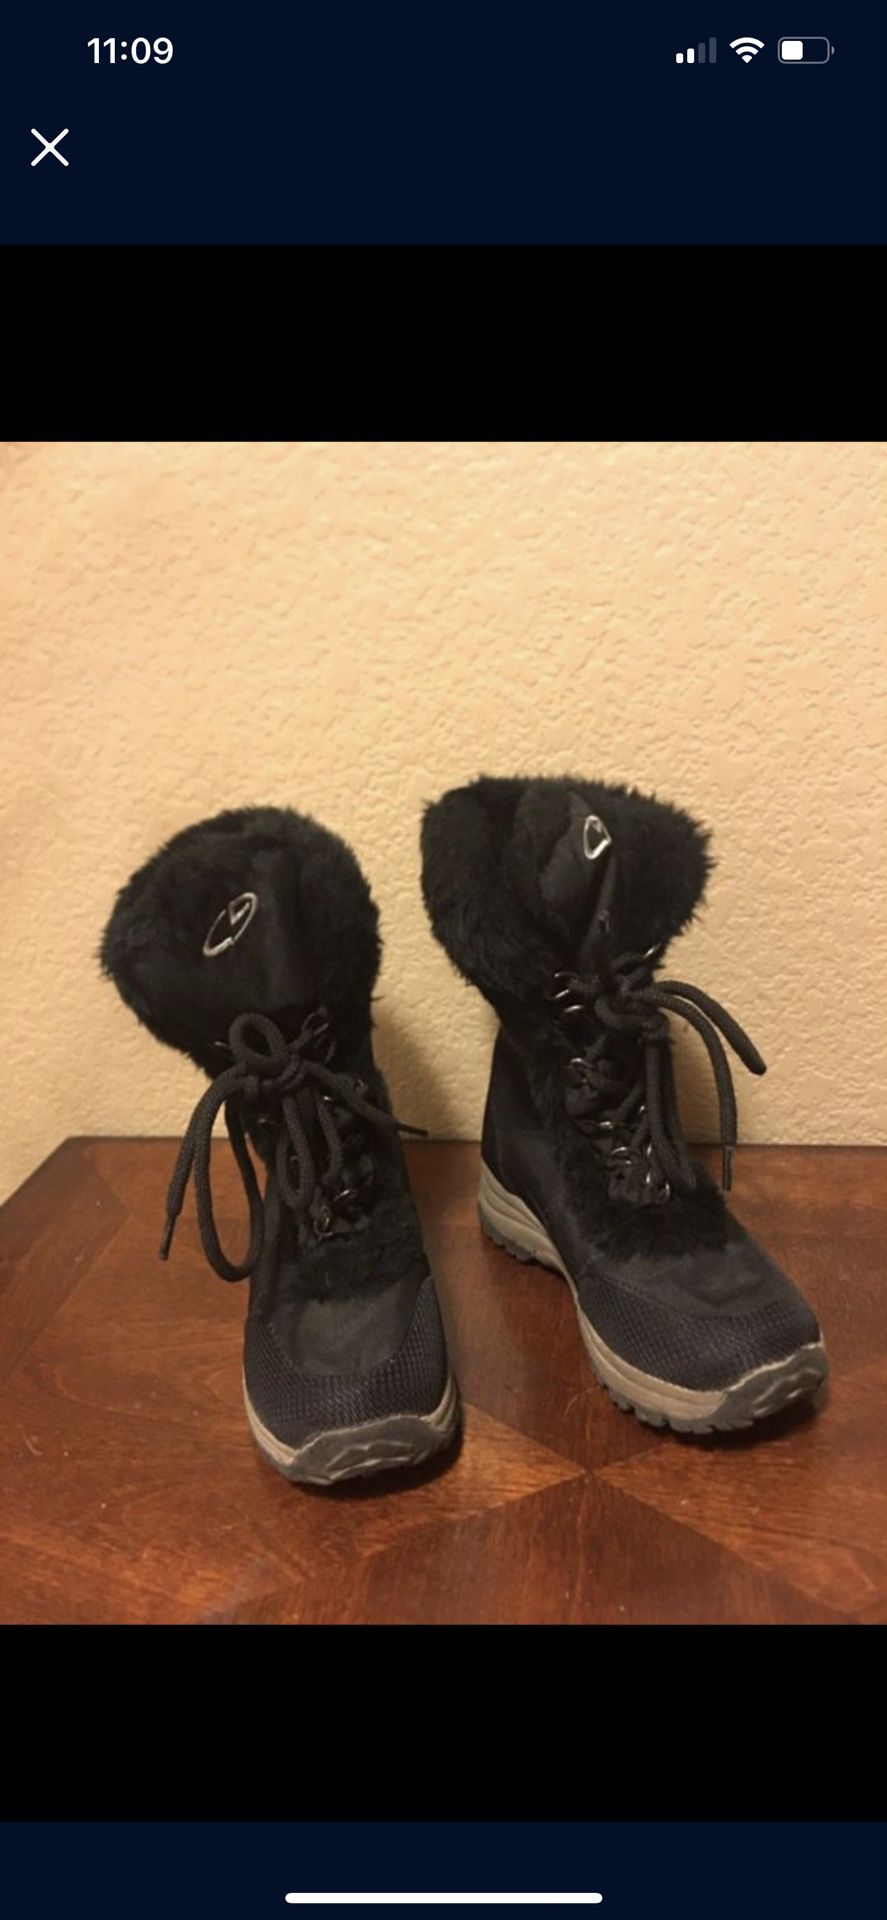 Girls Snow Boots Size 12c